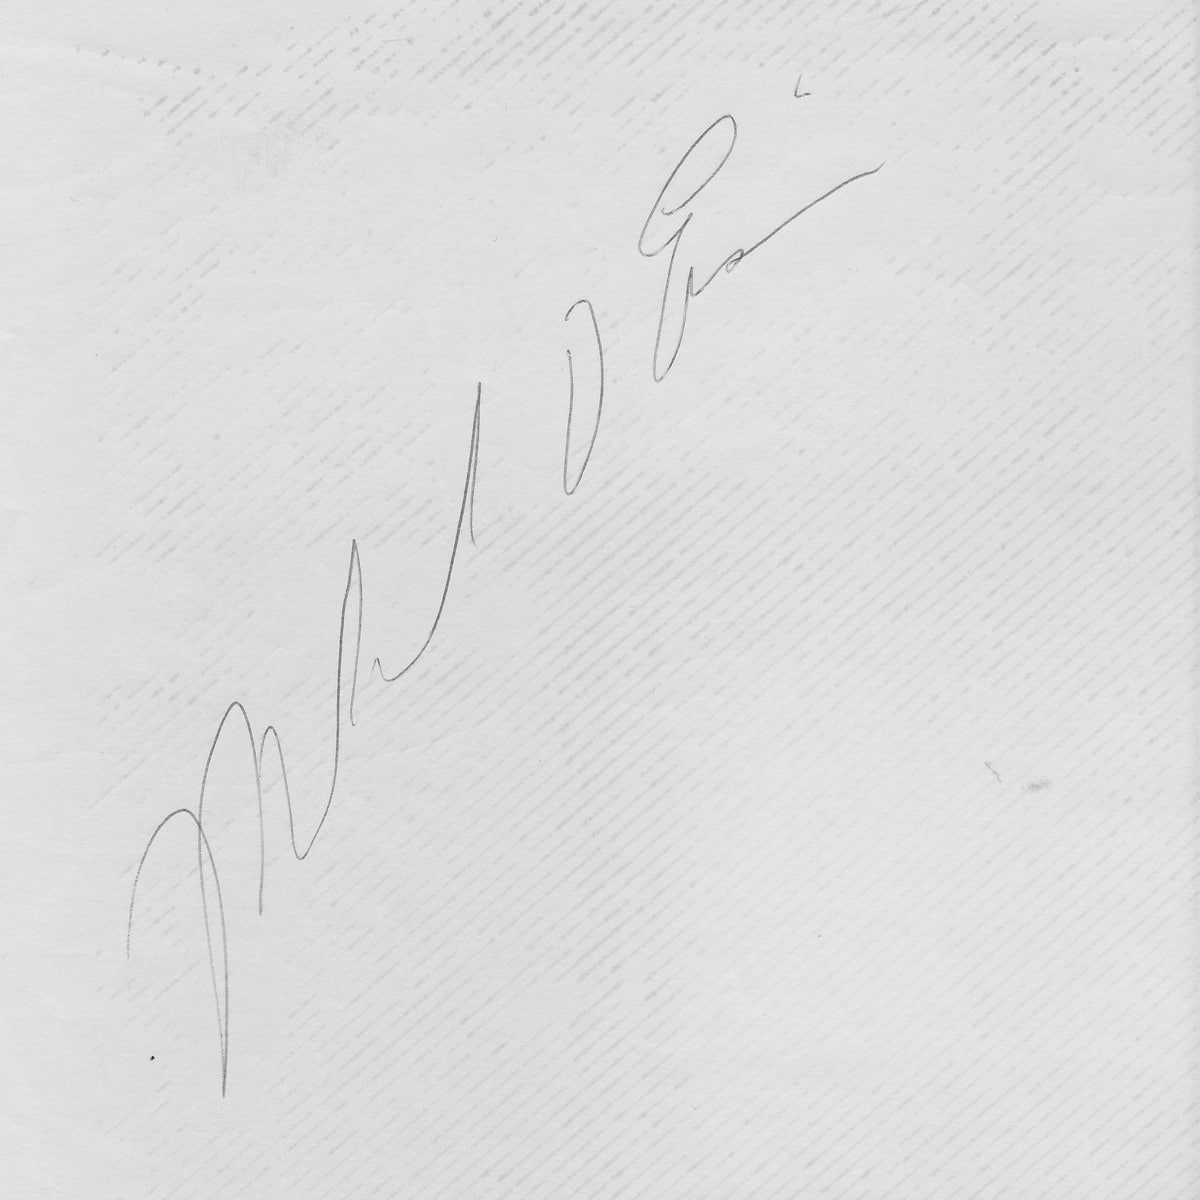 An autograph from… Mikel O. Eis?